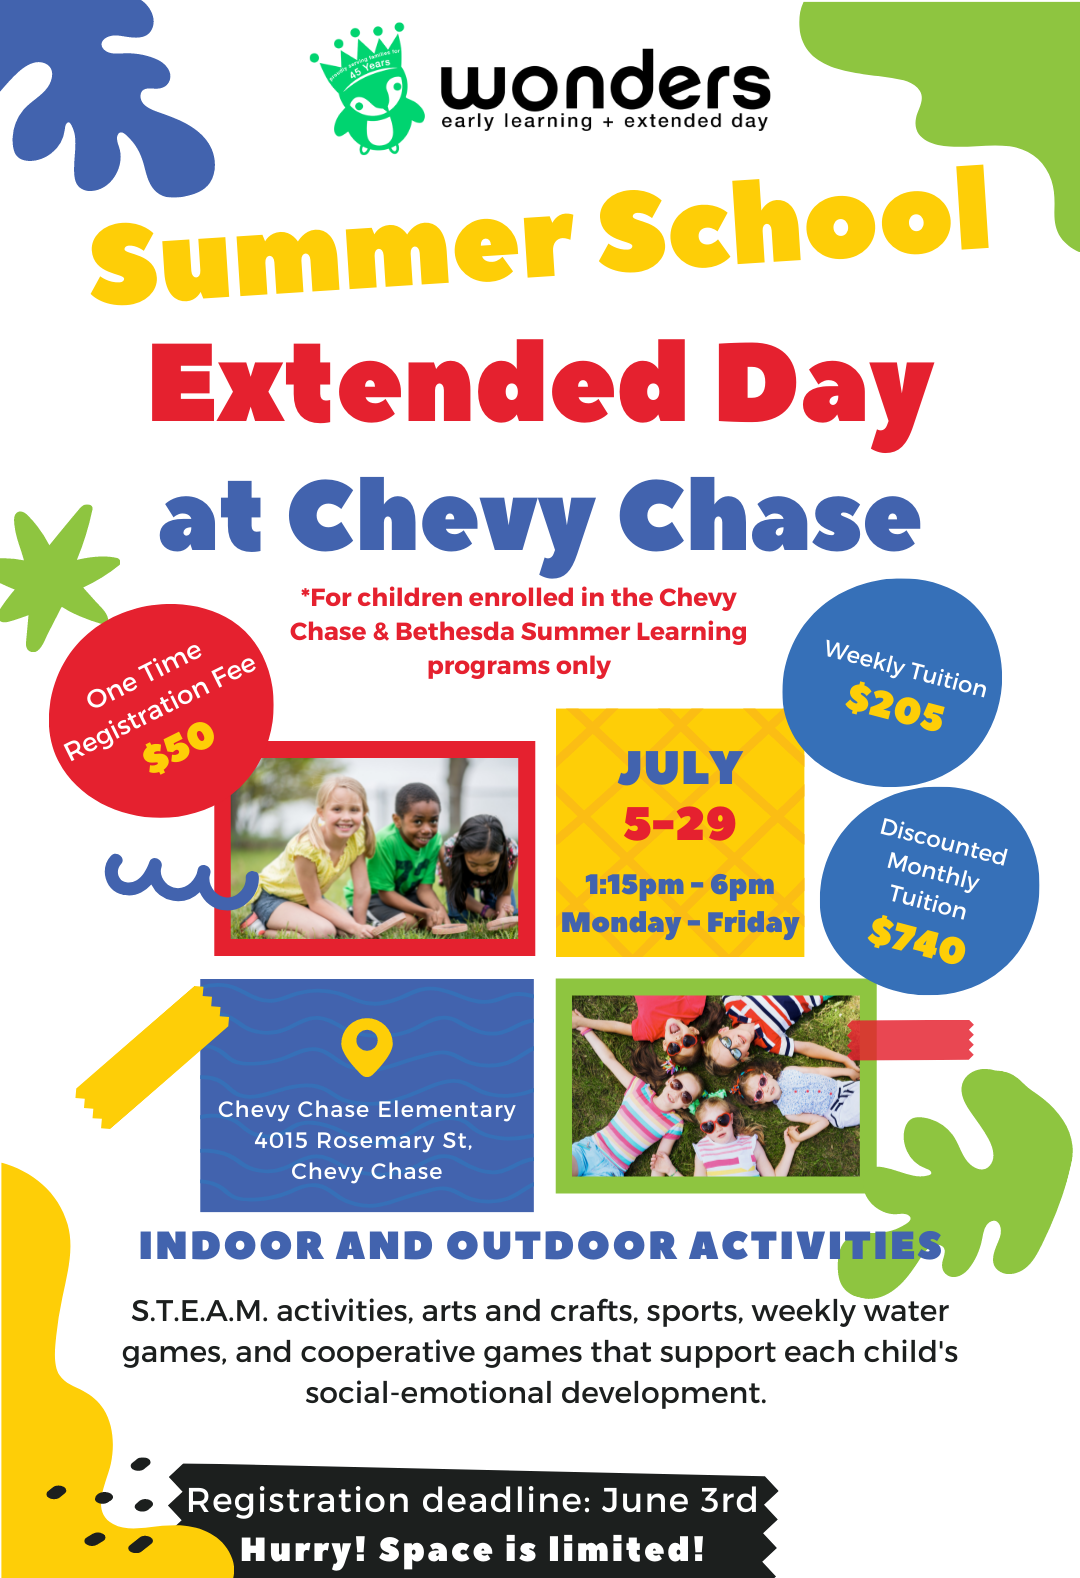 Wonders Summer Learning Extended Day at Chevy Chase. July 5-29, 1:15pm - 6pm. This program is only available to students attending summer learning at Chevy Chase and Bethesda Elementary School only. Indoor and outdoor activities; S.T.E.A.M. activities, arts and crafts, sports, weekly water games, and cooperative games that support each child's social-emotional development. Registration fee: $50, Weekly tuition rate: $205. Monthly tuition discount: $740